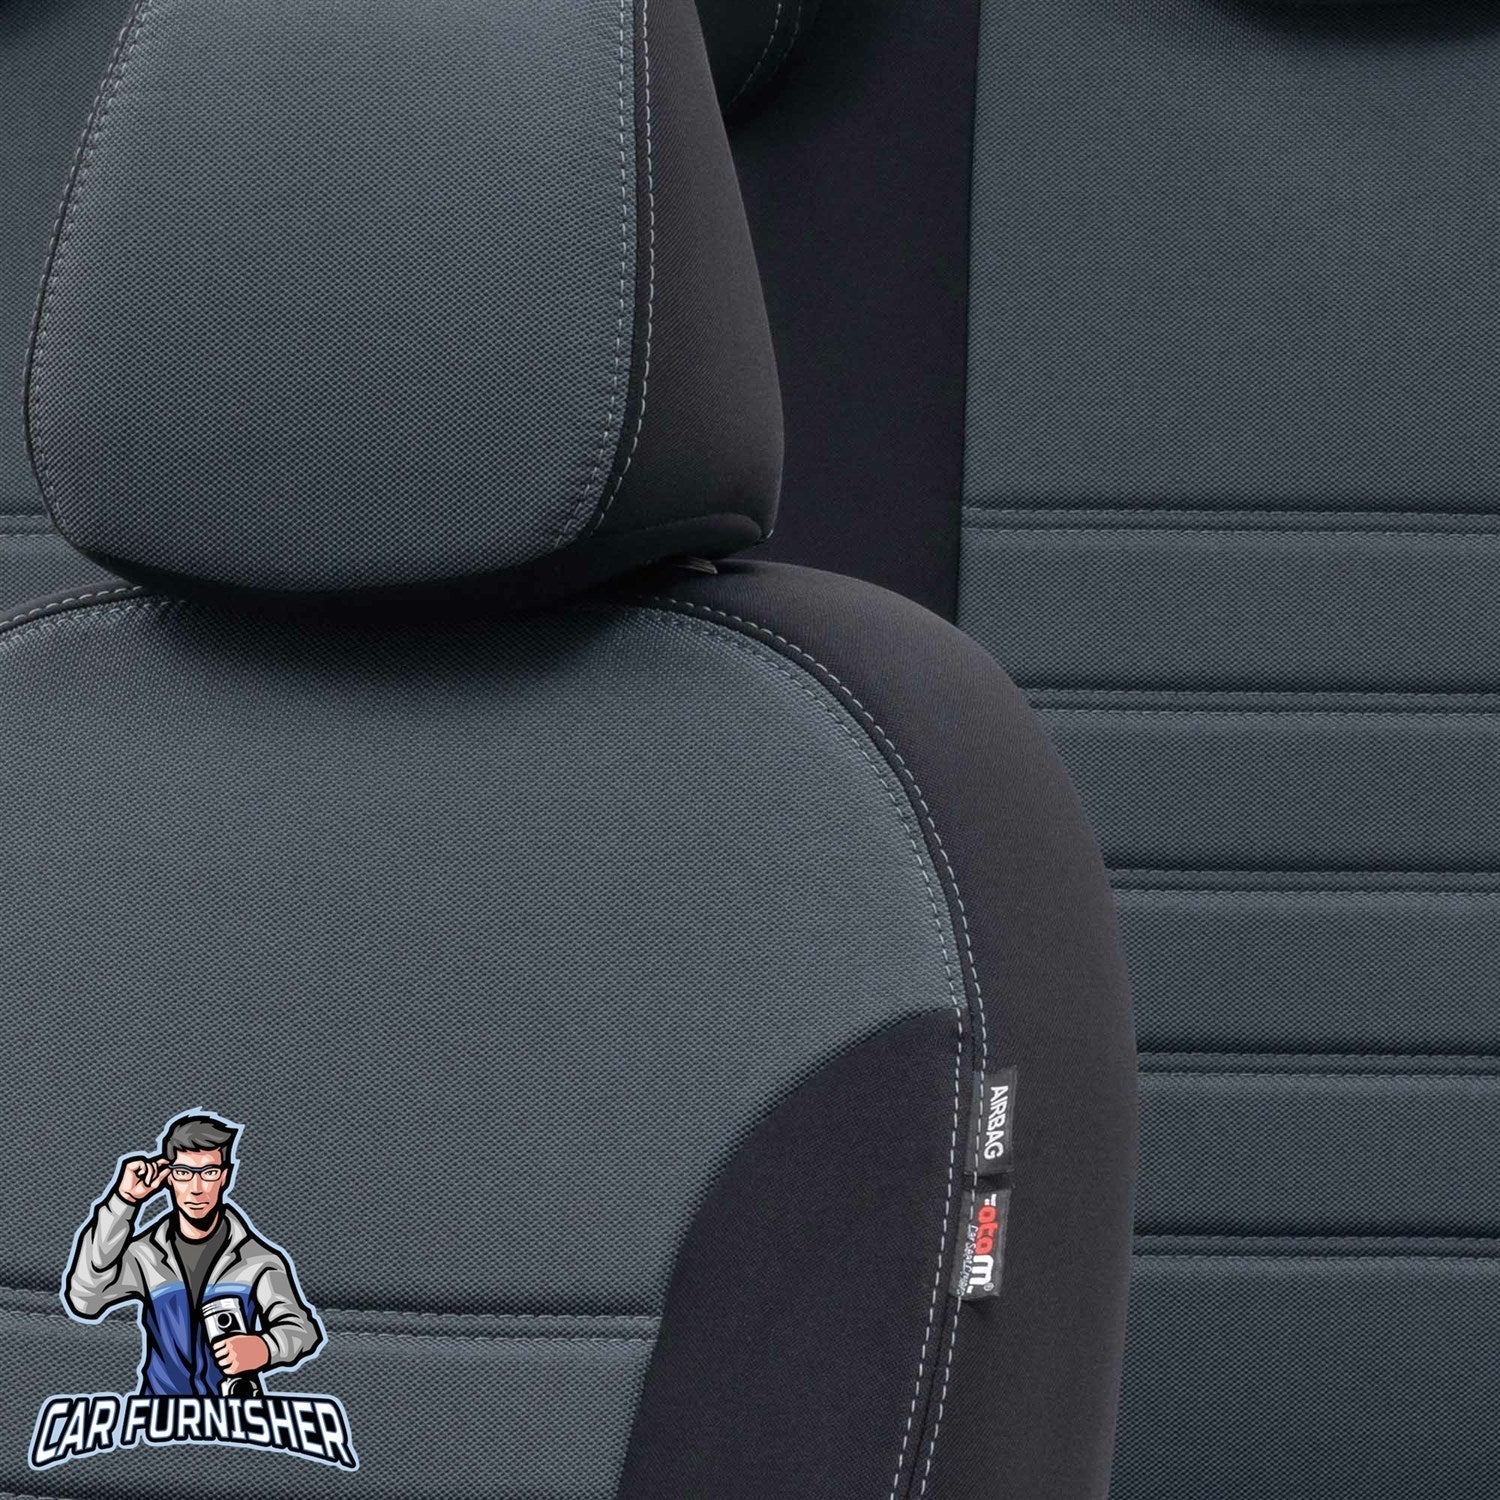 Ford F-Max Seat Cover Original Jacquard Design Smoked Black Front Seats (2 Seats + Handrest + Headrests) Jacquard Fabric